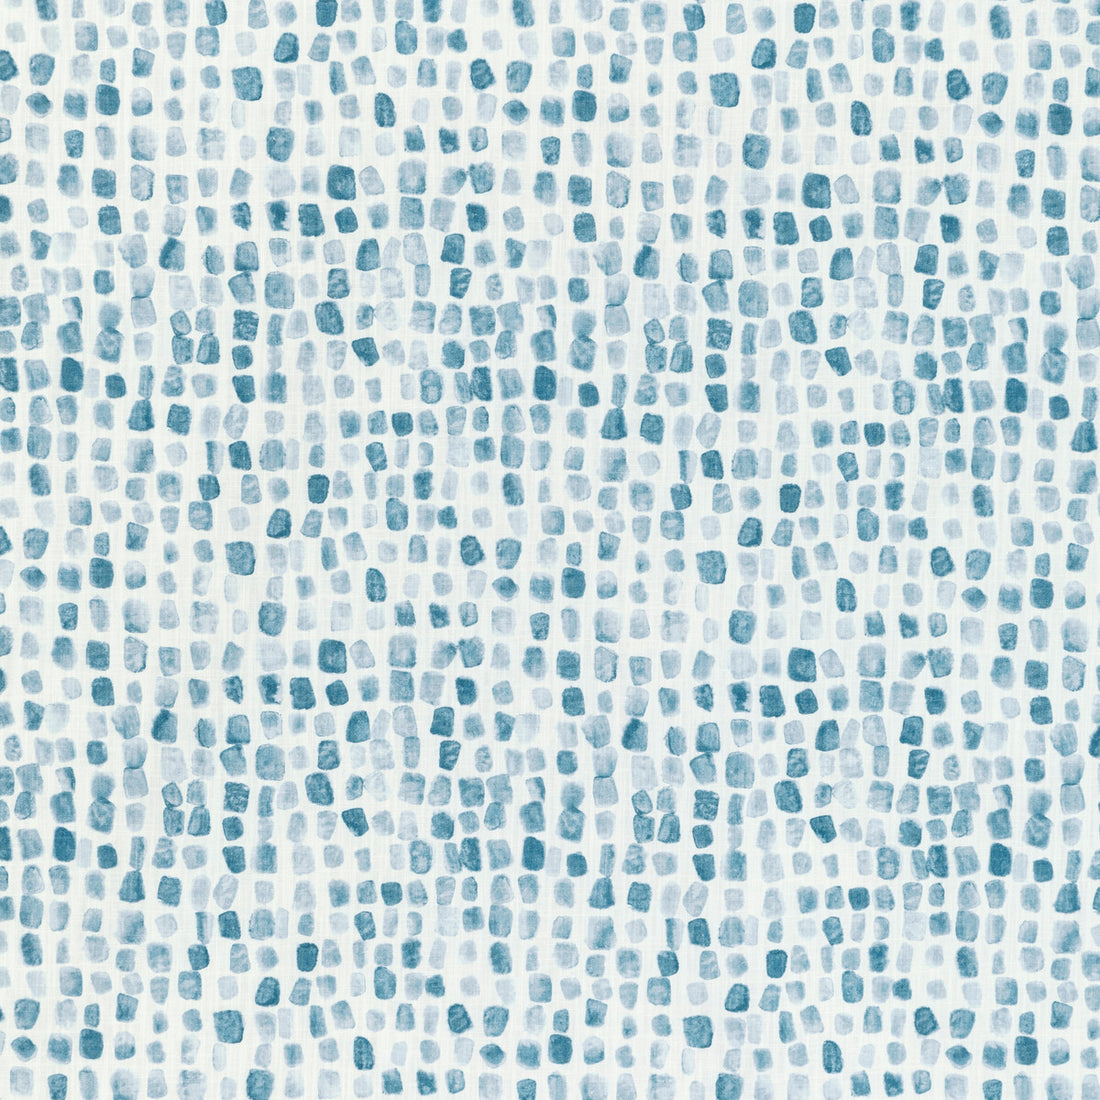 Shodo Path fabric in cerulean color - pattern SHODO PATH.5.0 - by Kravet Basics in the Monterey collection